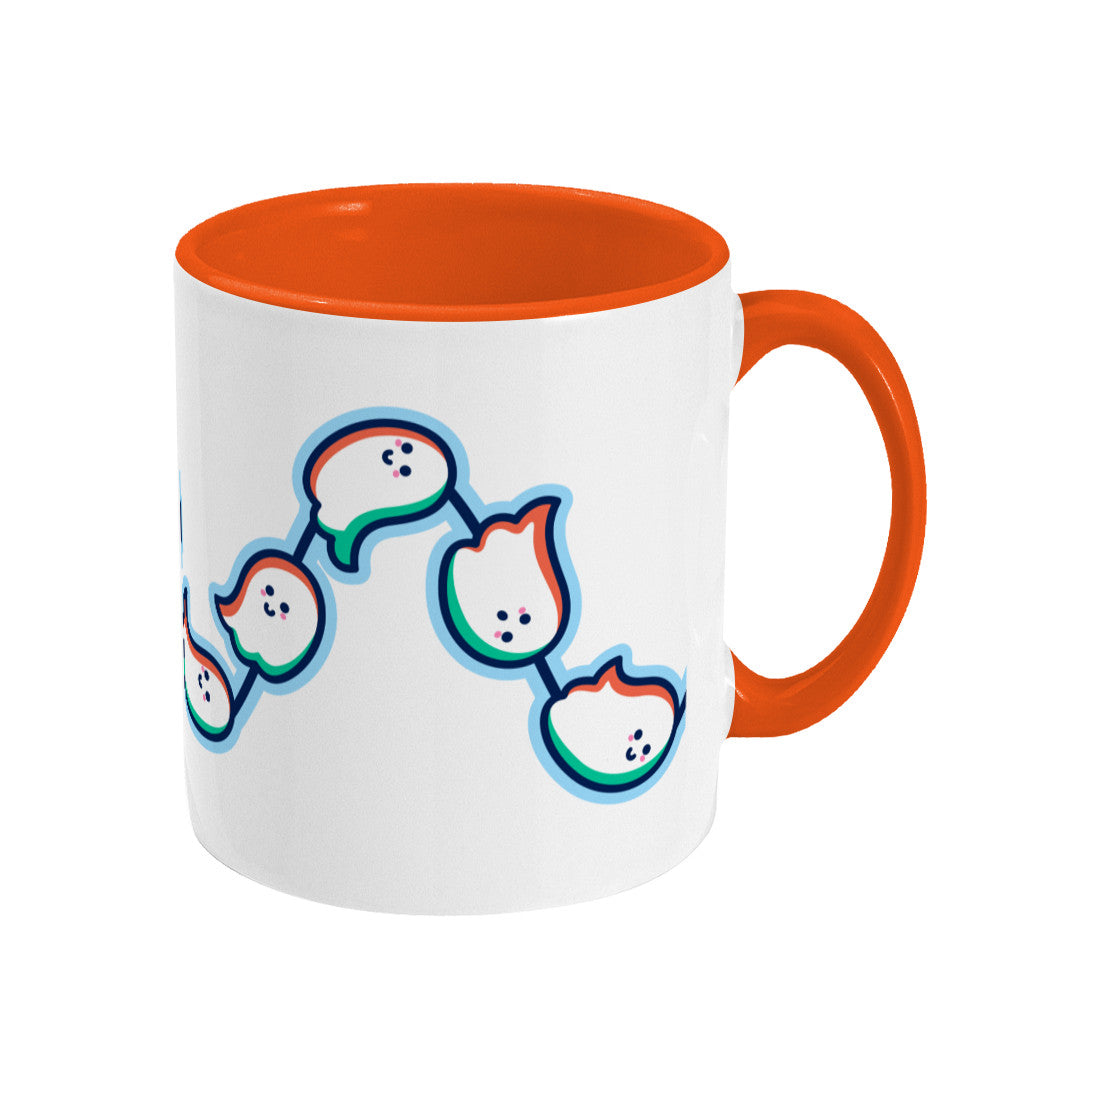 A white mug with an orange handle and inside, with a design of a wavy line of cute ghosts flying from left to right around the mug. Handle on right.